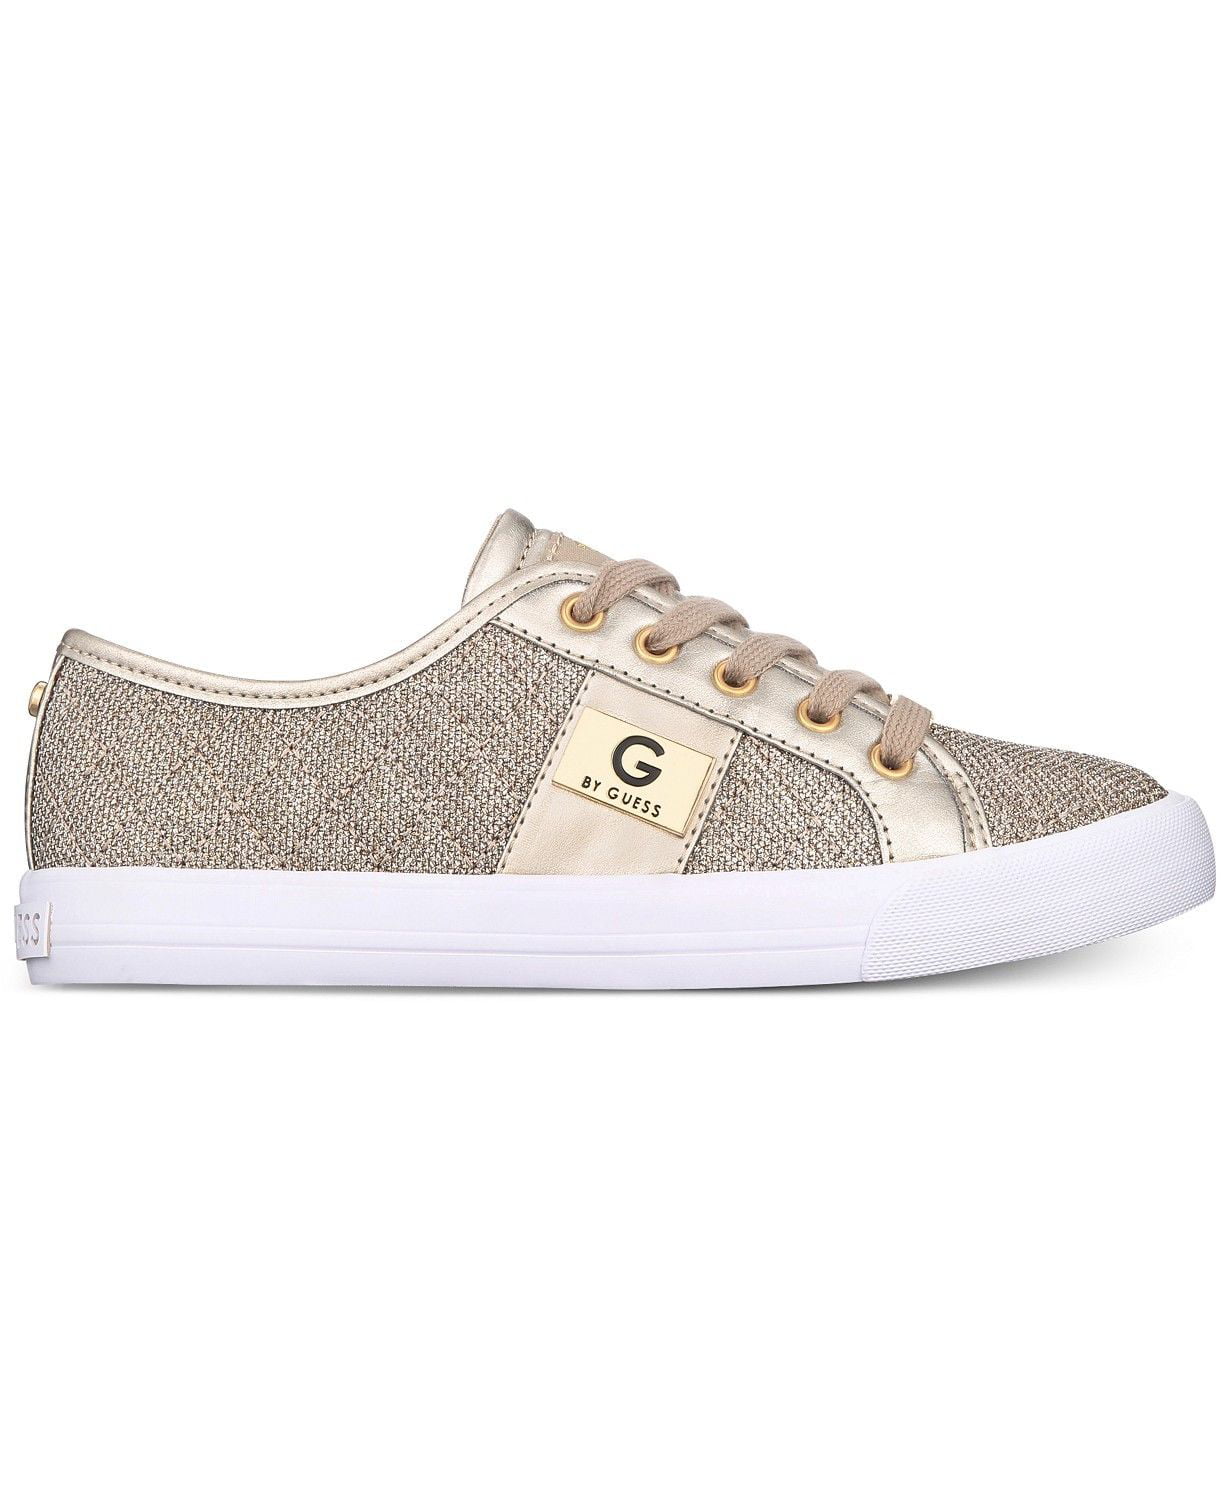 G by Lace Up Leather Quilted Fabric Glitter Sneakers Gold (5.5) - Walmart.com